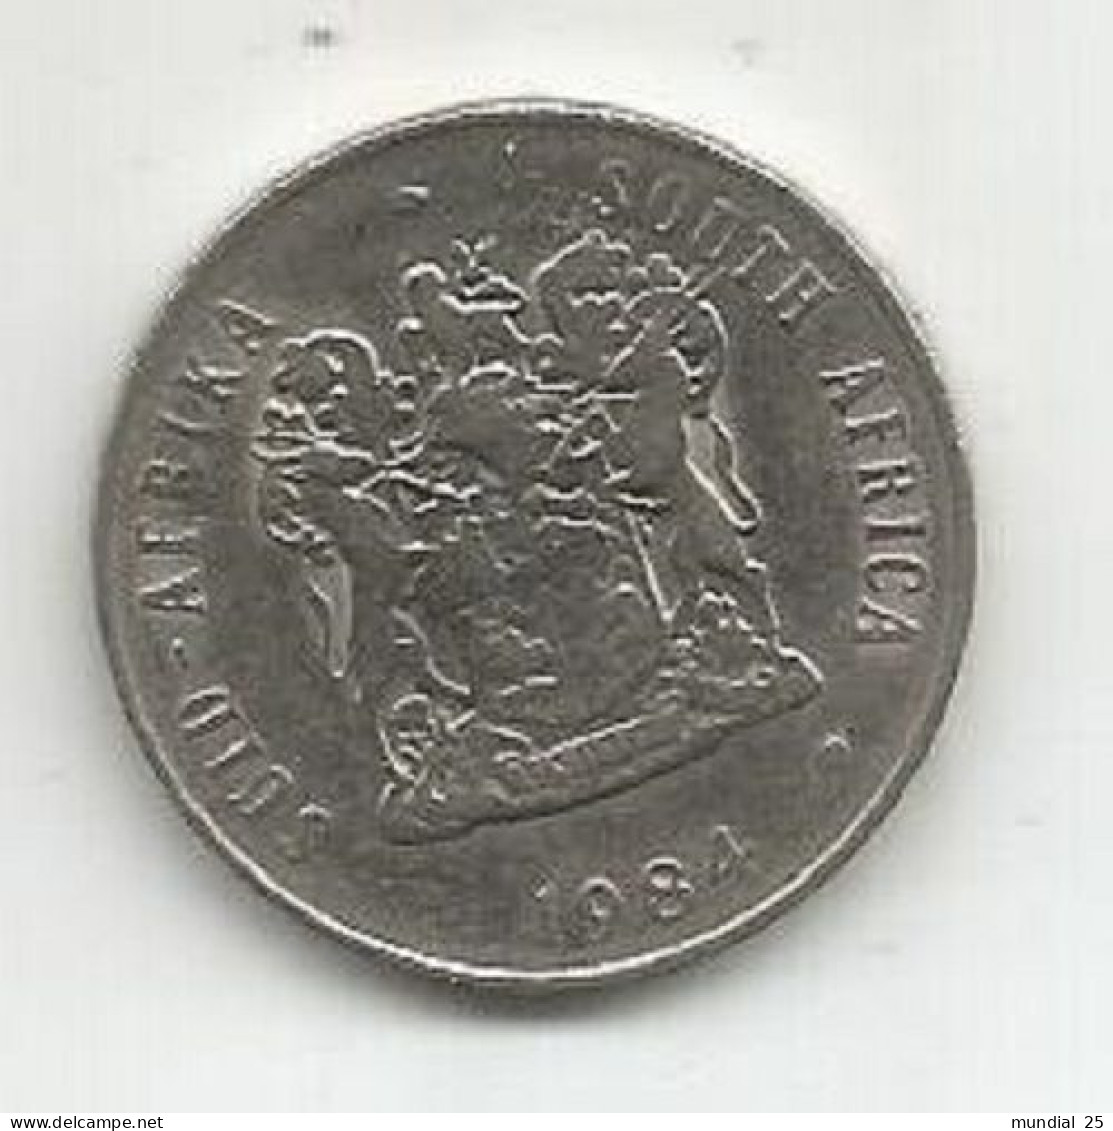 SOUTH AFRICA 20 CENTS 1984 - Sud Africa